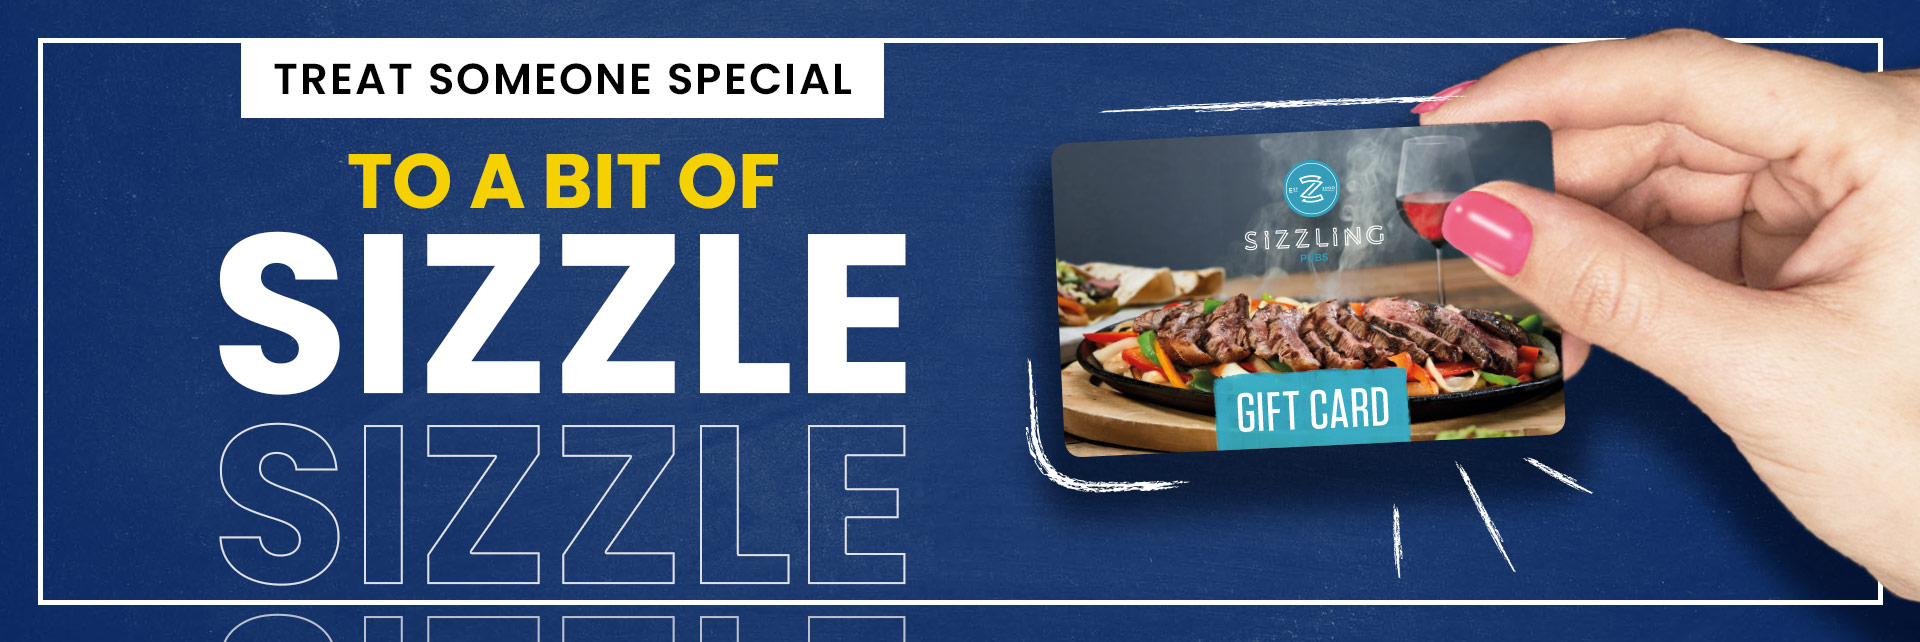 Sizzling Pubs Gift Card at The Drakes Drum in Birmingham